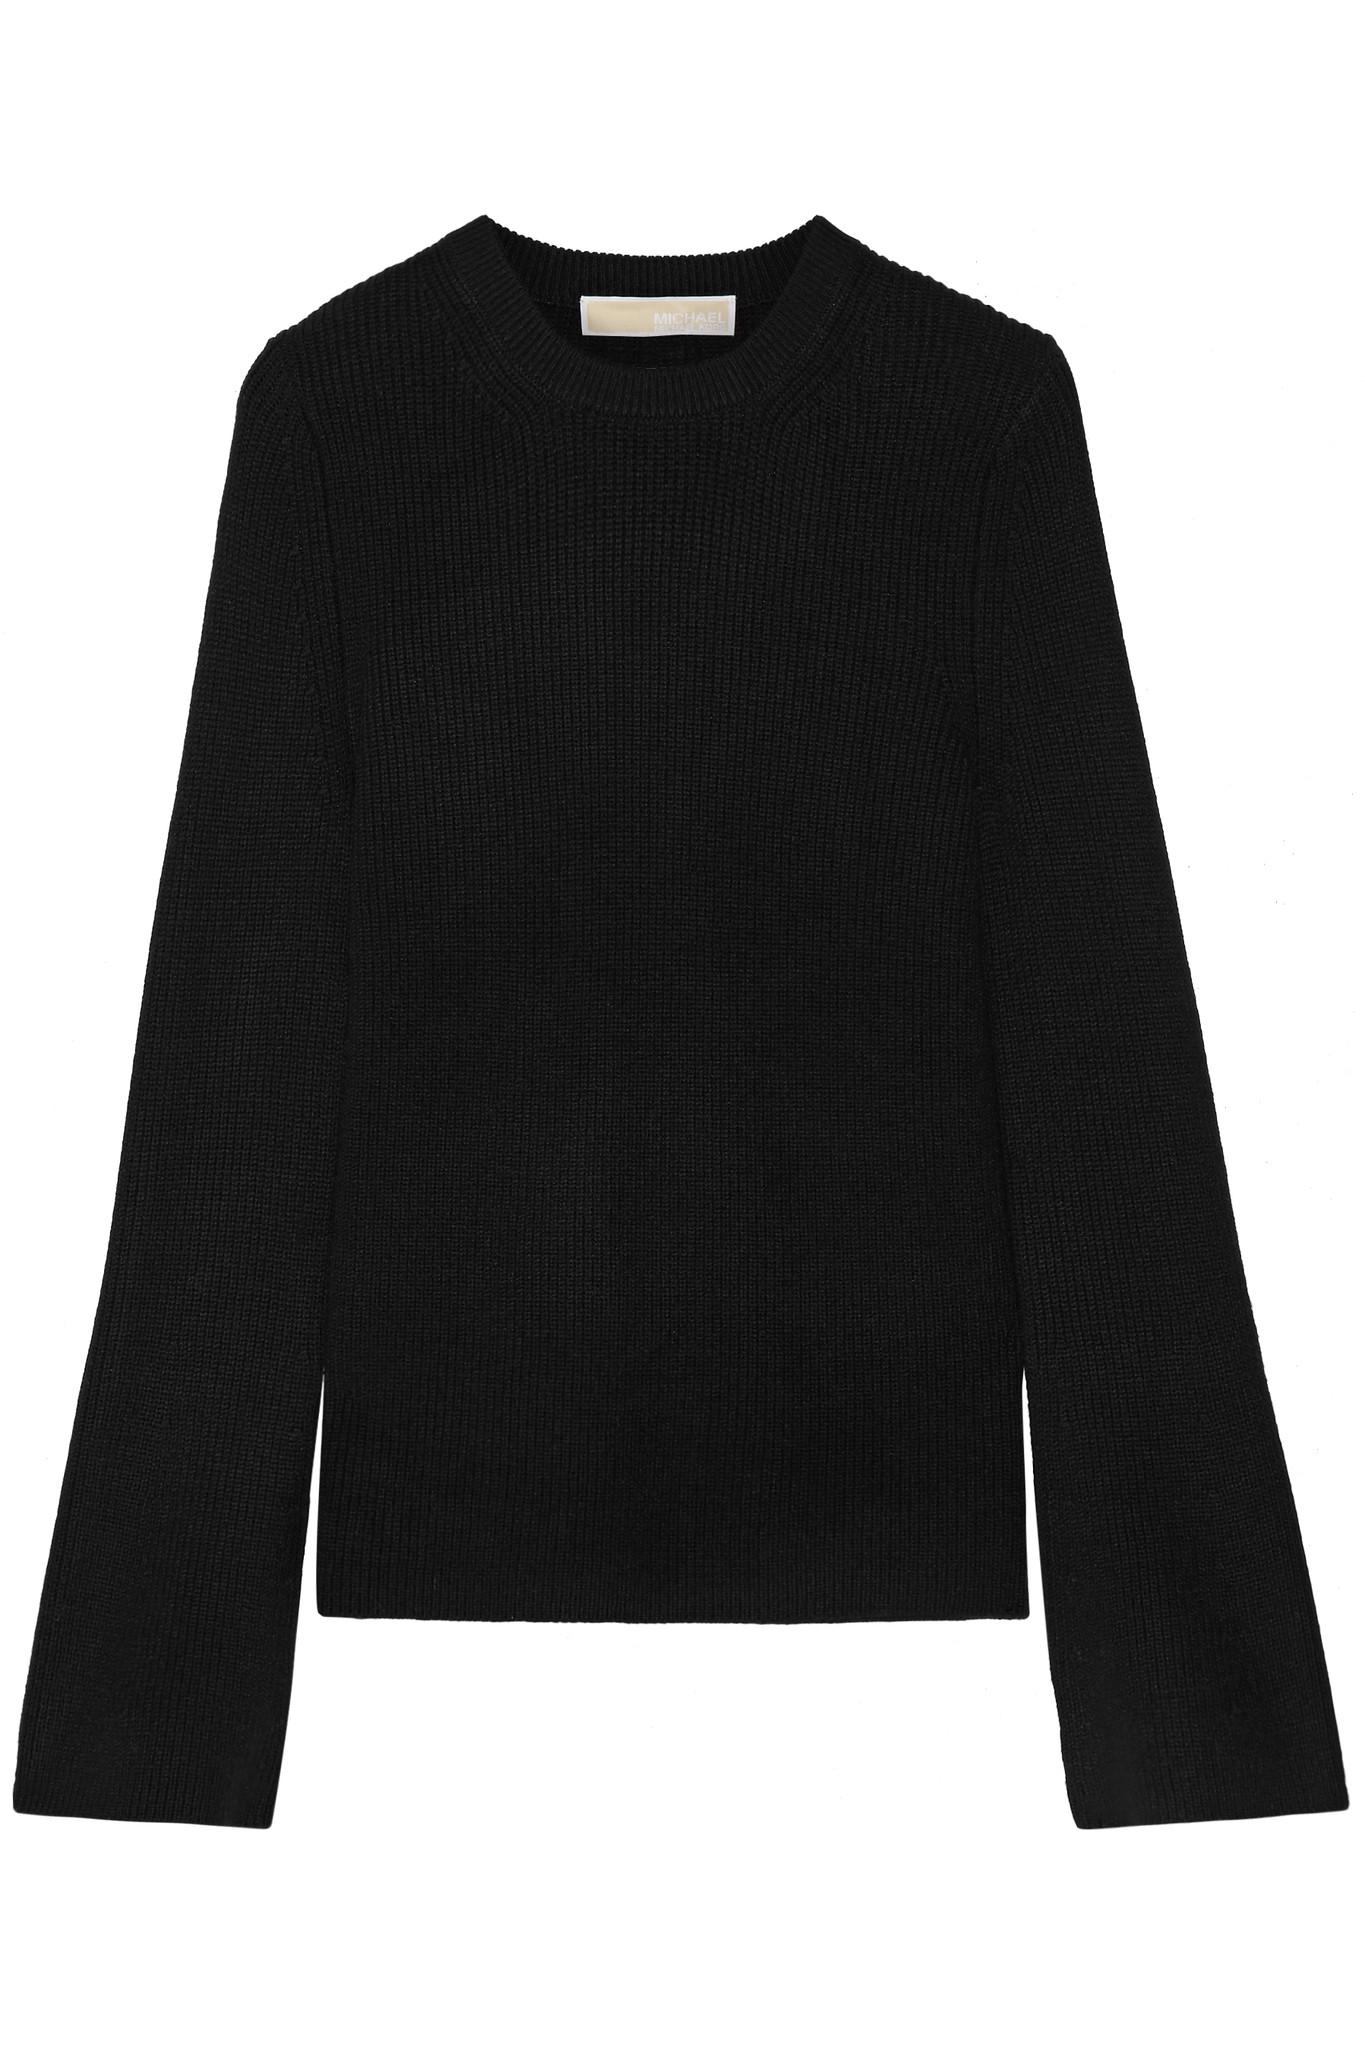 Lyst - Michael Michael Kors Ribbed-knit Sweater in Black